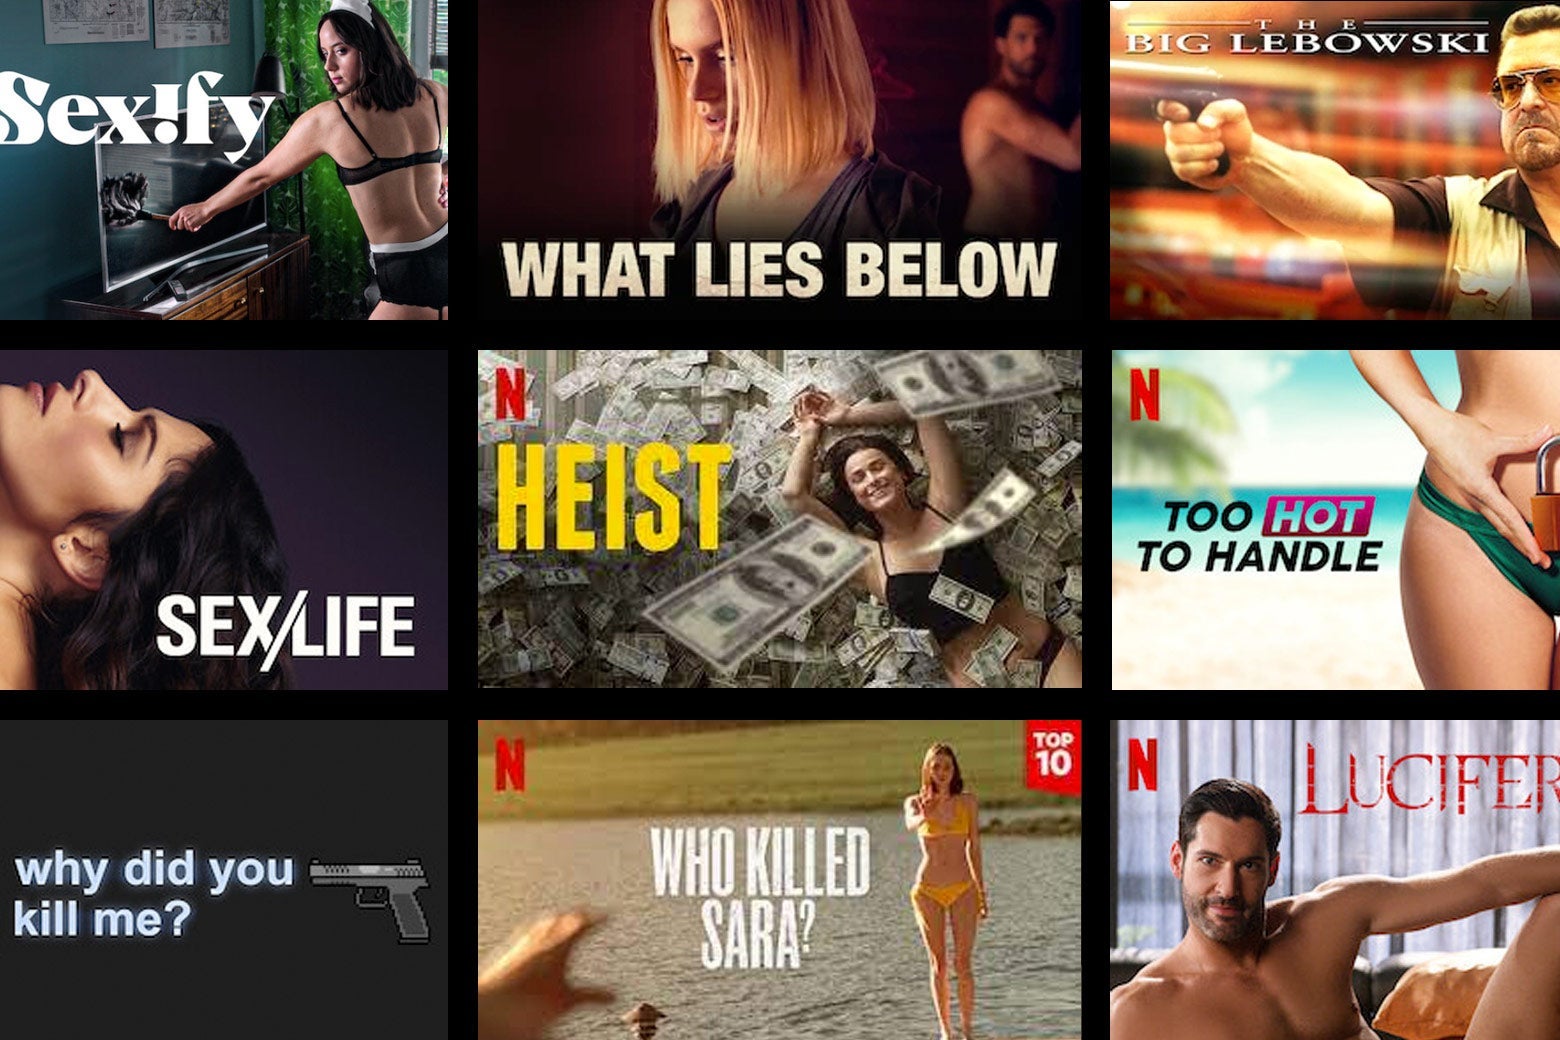 Netflix Top 10 The streaming services clickbait problem threatens to ruin